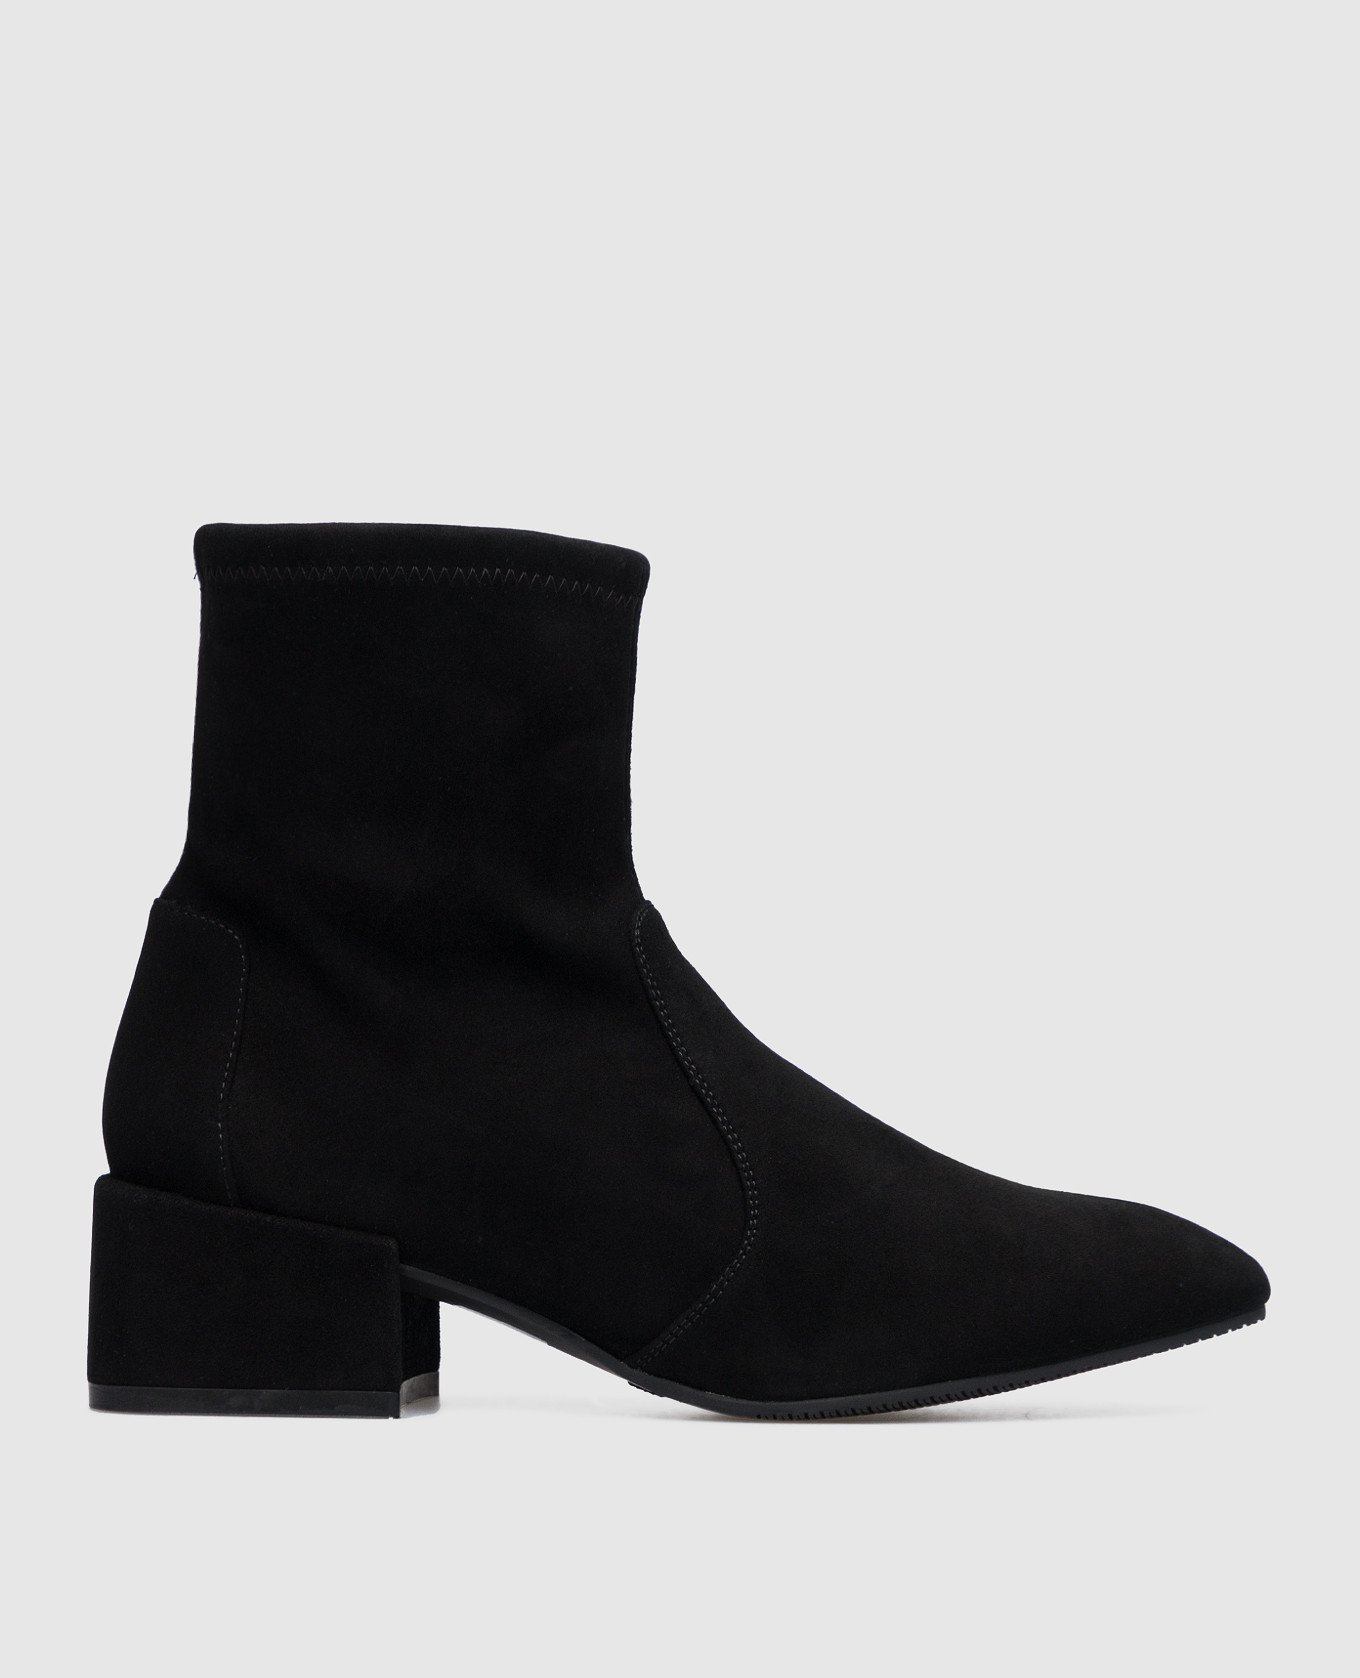 Black suede accordion ankle boots